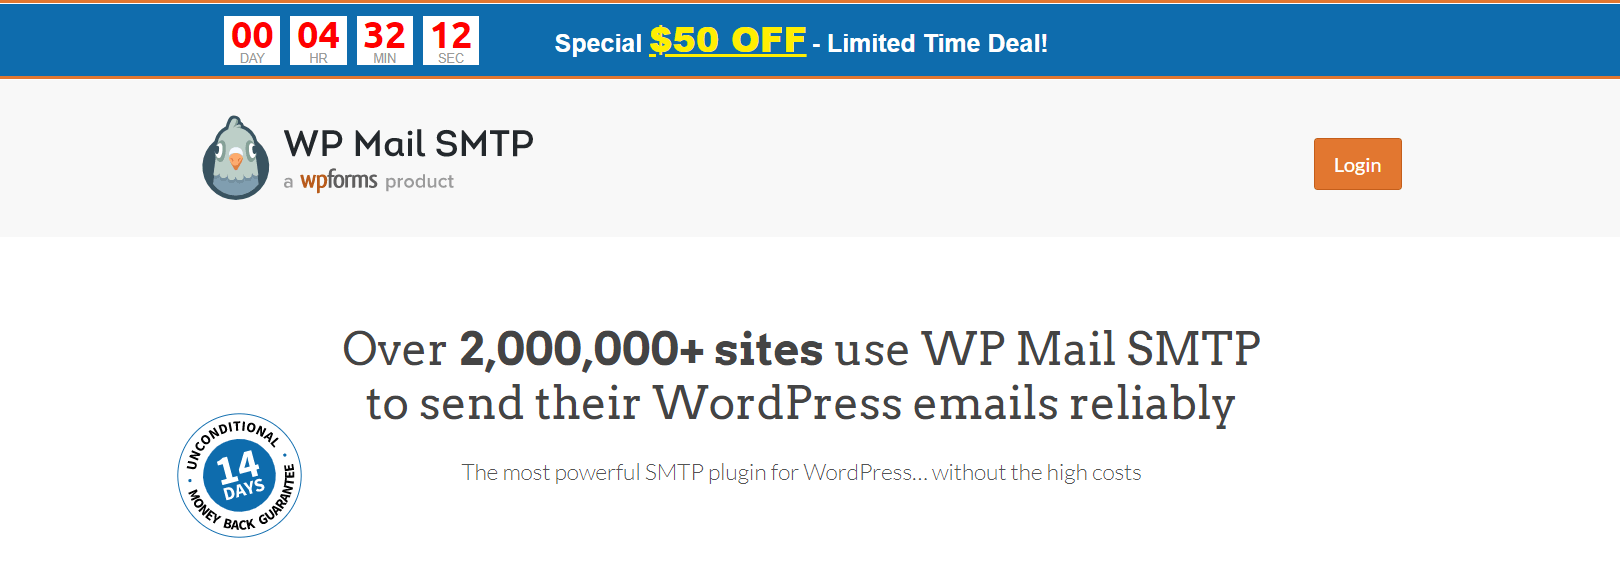 WP Mail SMTP Black Friday Deal 2021